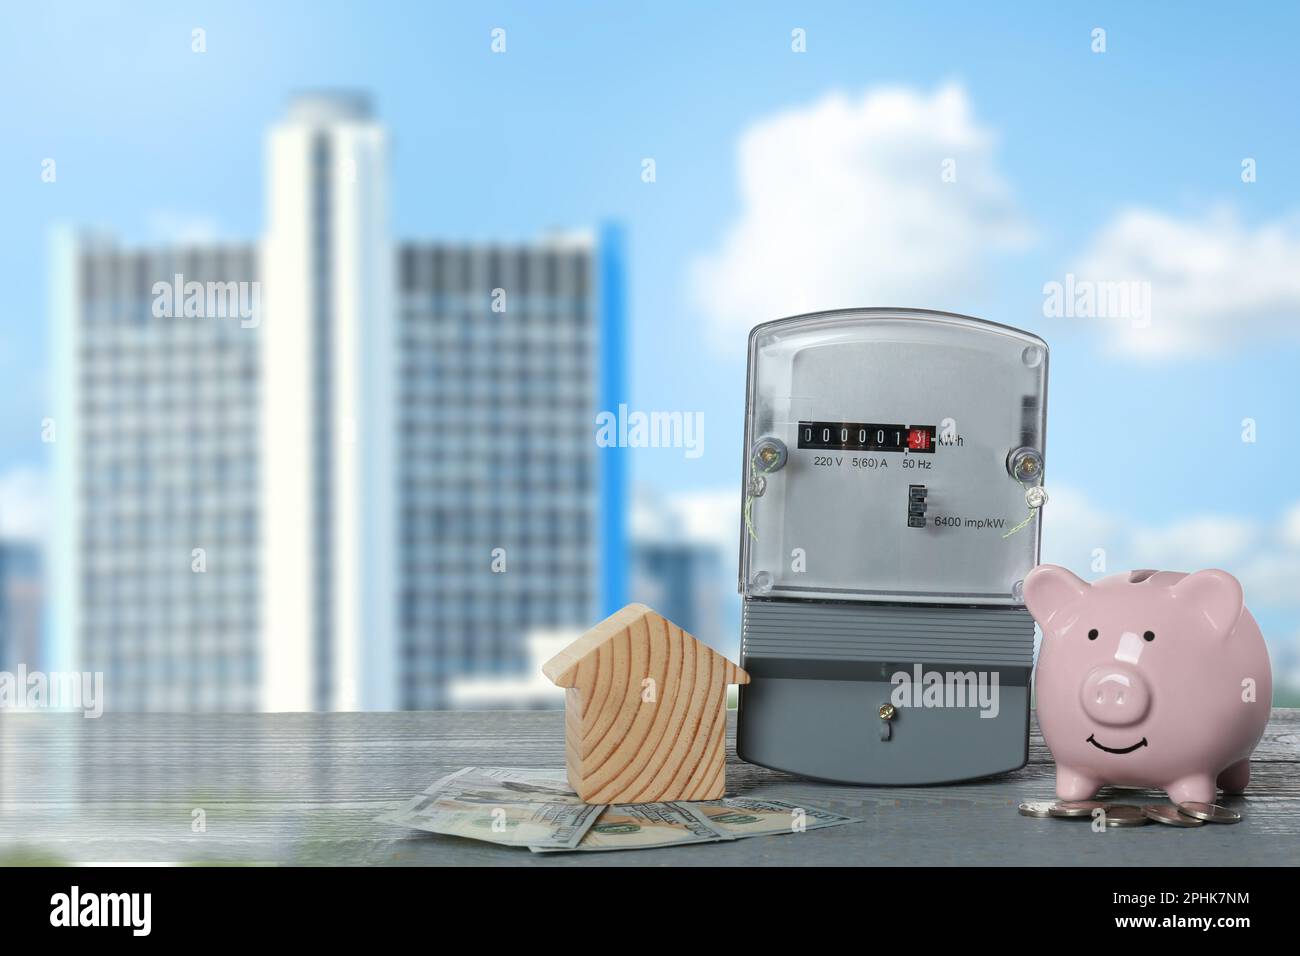 Electricity meter, house model, money and piggy bank on grey wooden table against blurred view of cityscape Stock Photo